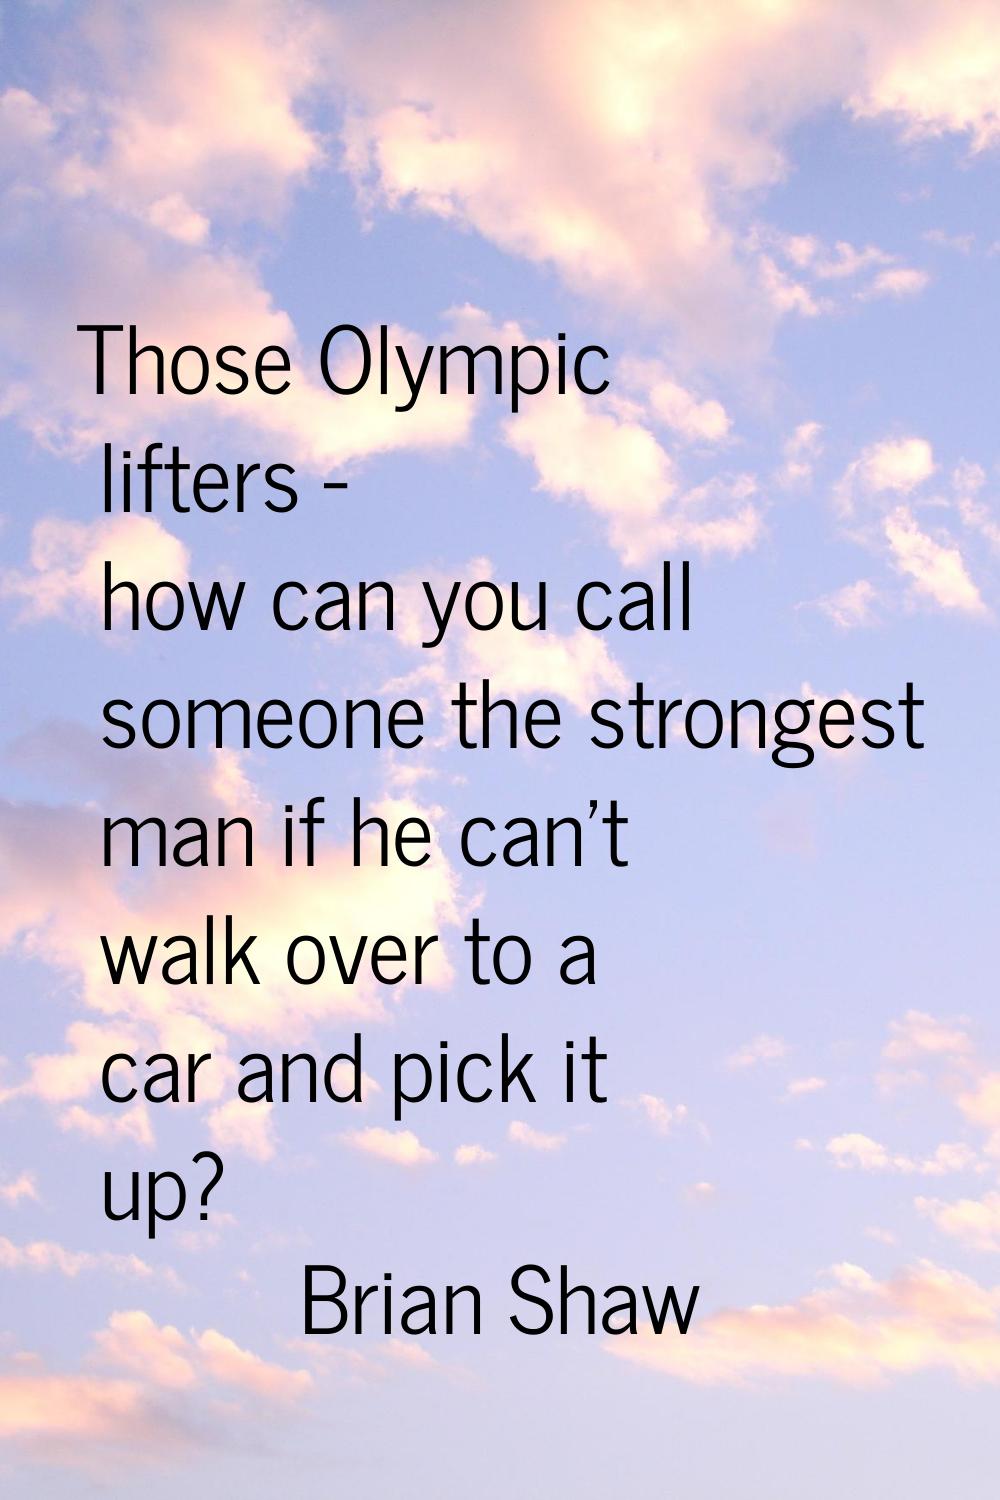 Those Olympic lifters - how can you call someone the strongest man if he can't walk over to a car a